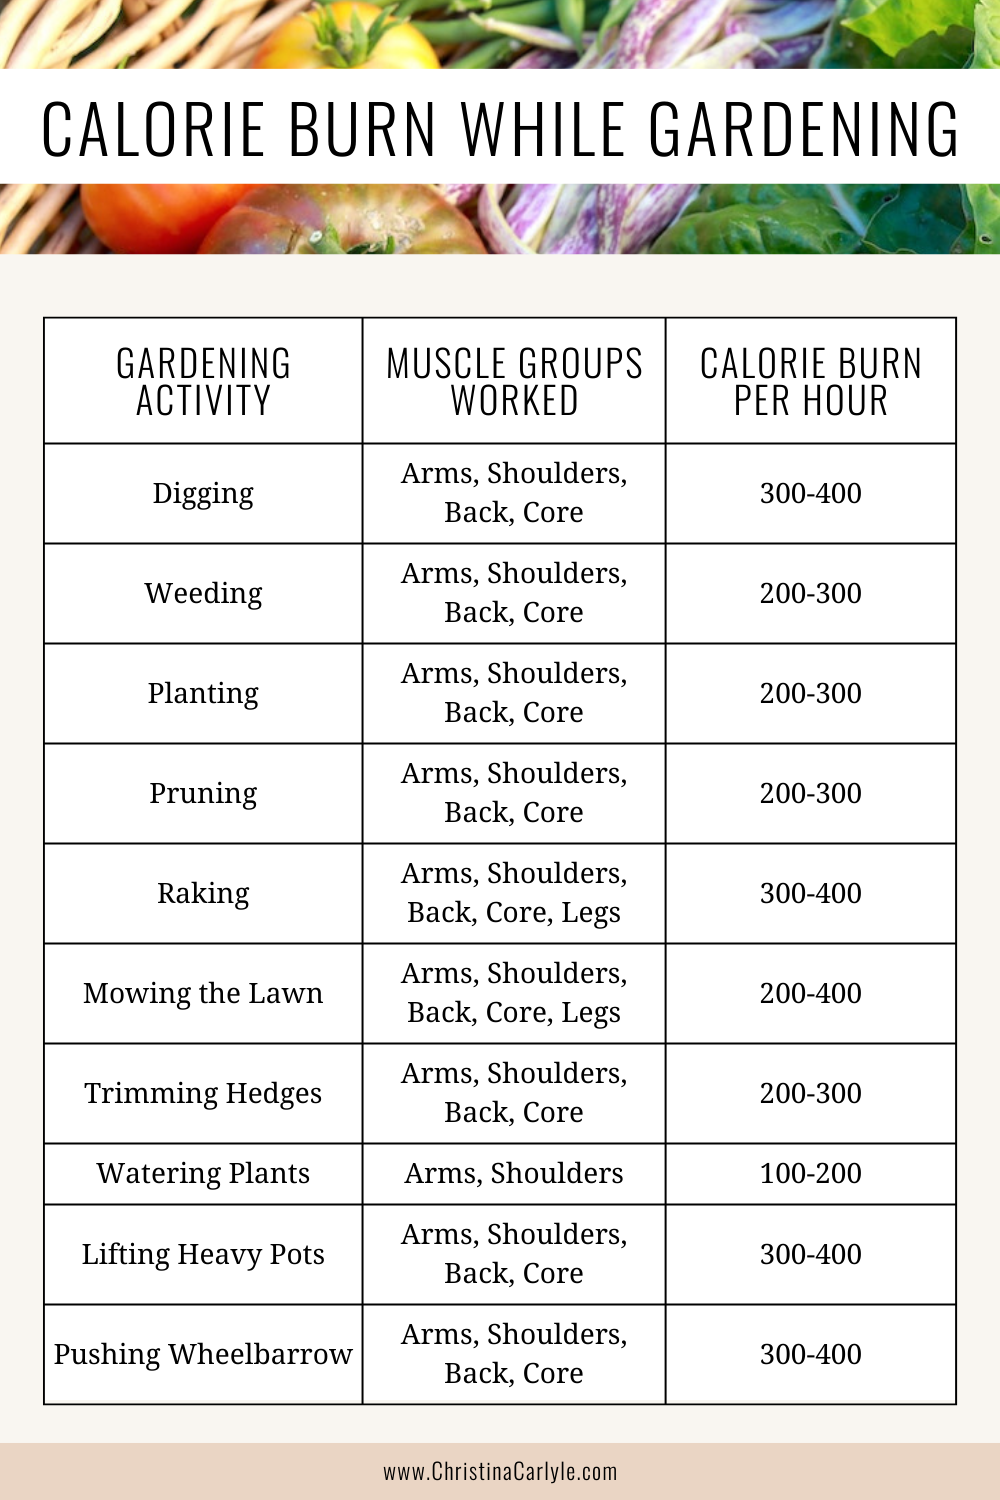 Calories burned while gardening chart